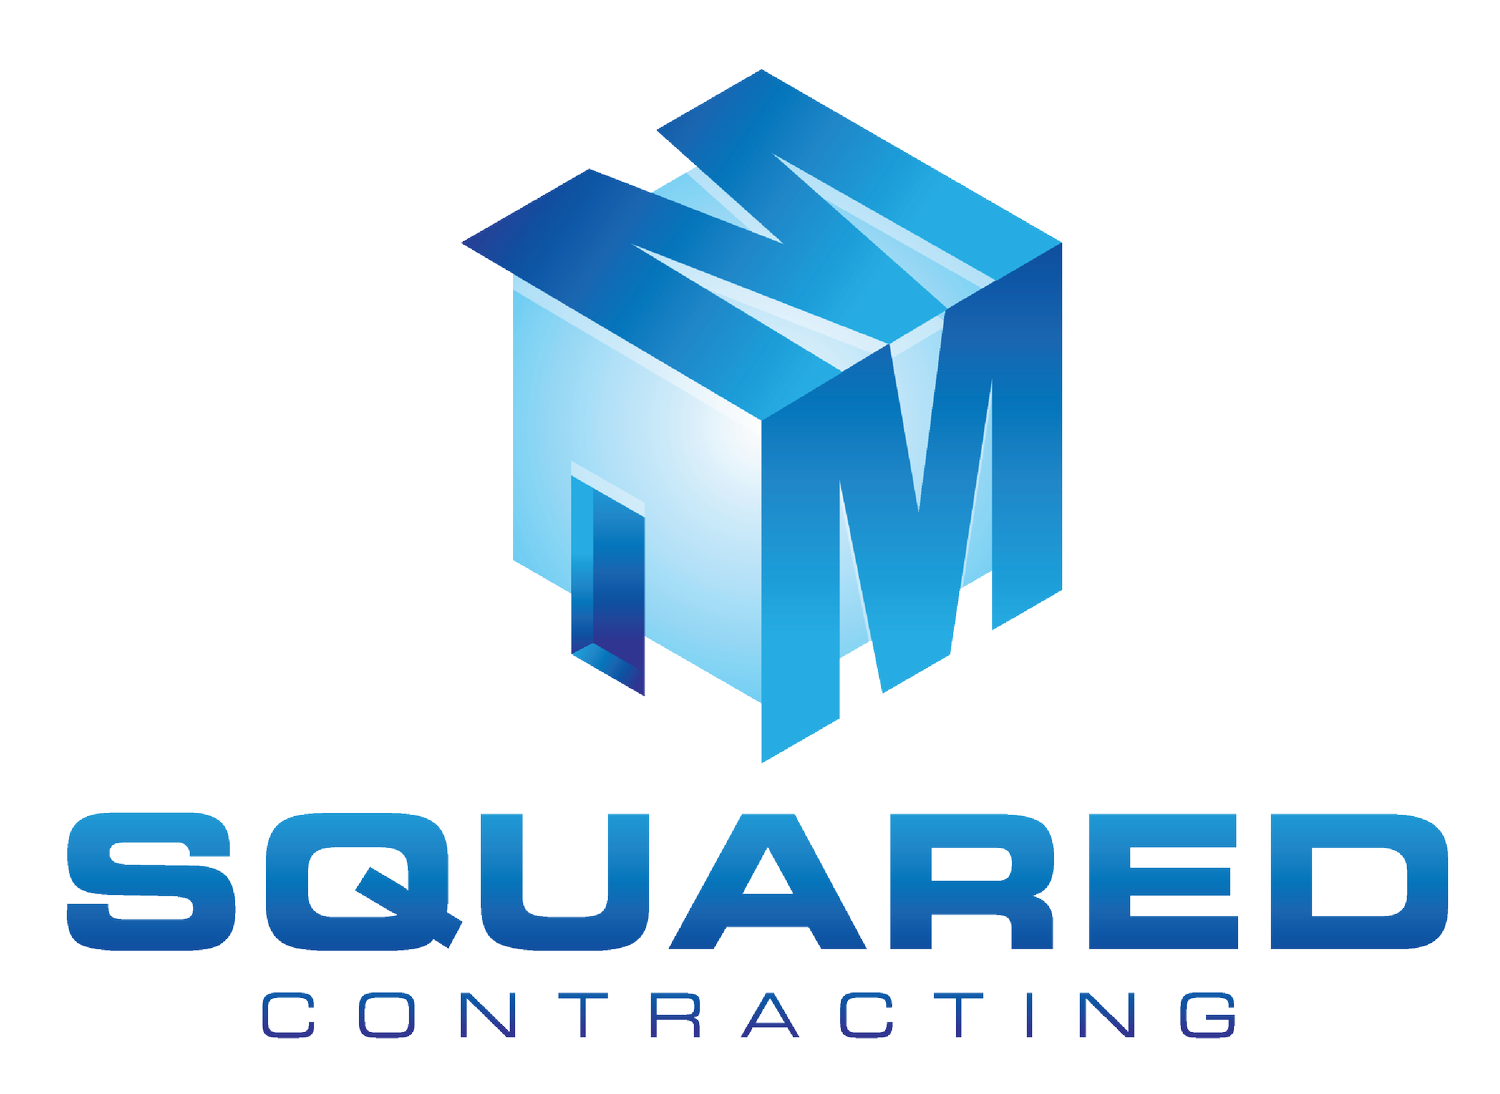 M Squared Contracting